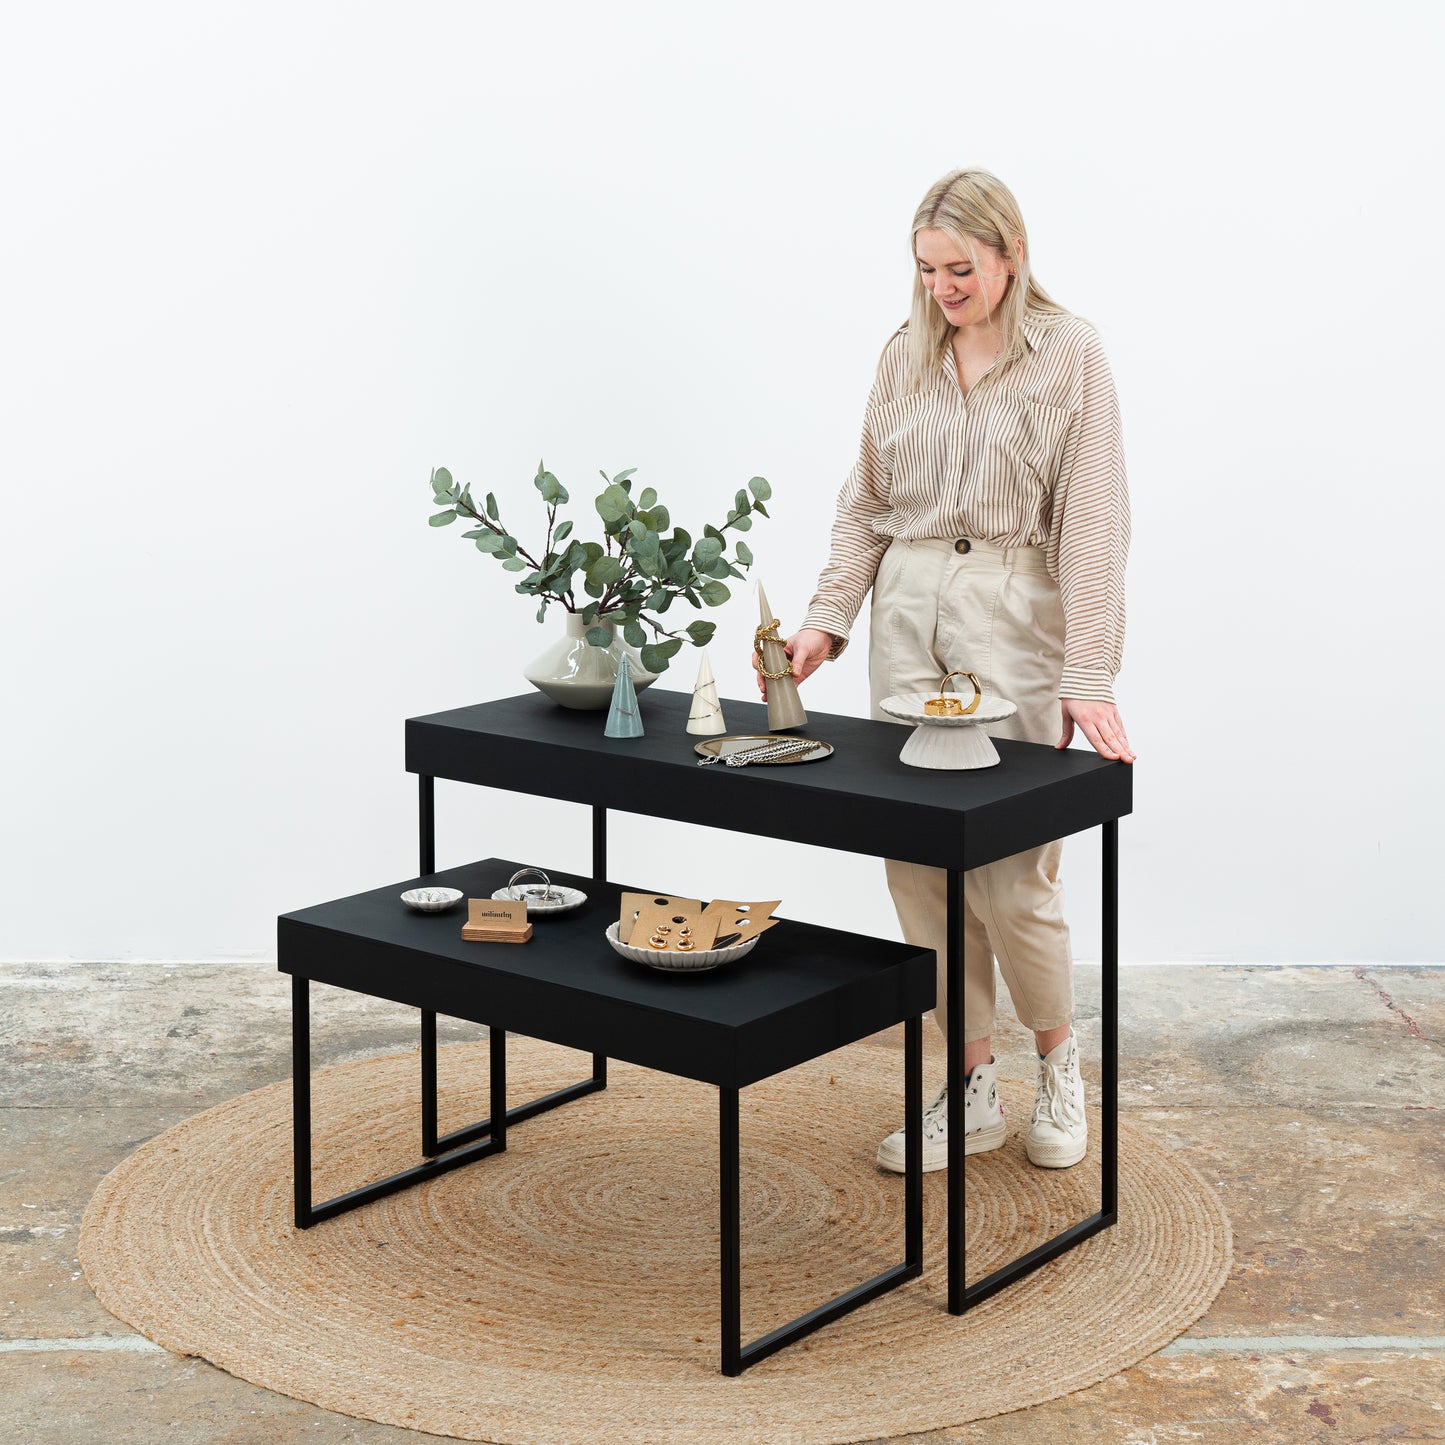 2 display tables SC-05-BL-BL, foldable nesting tables